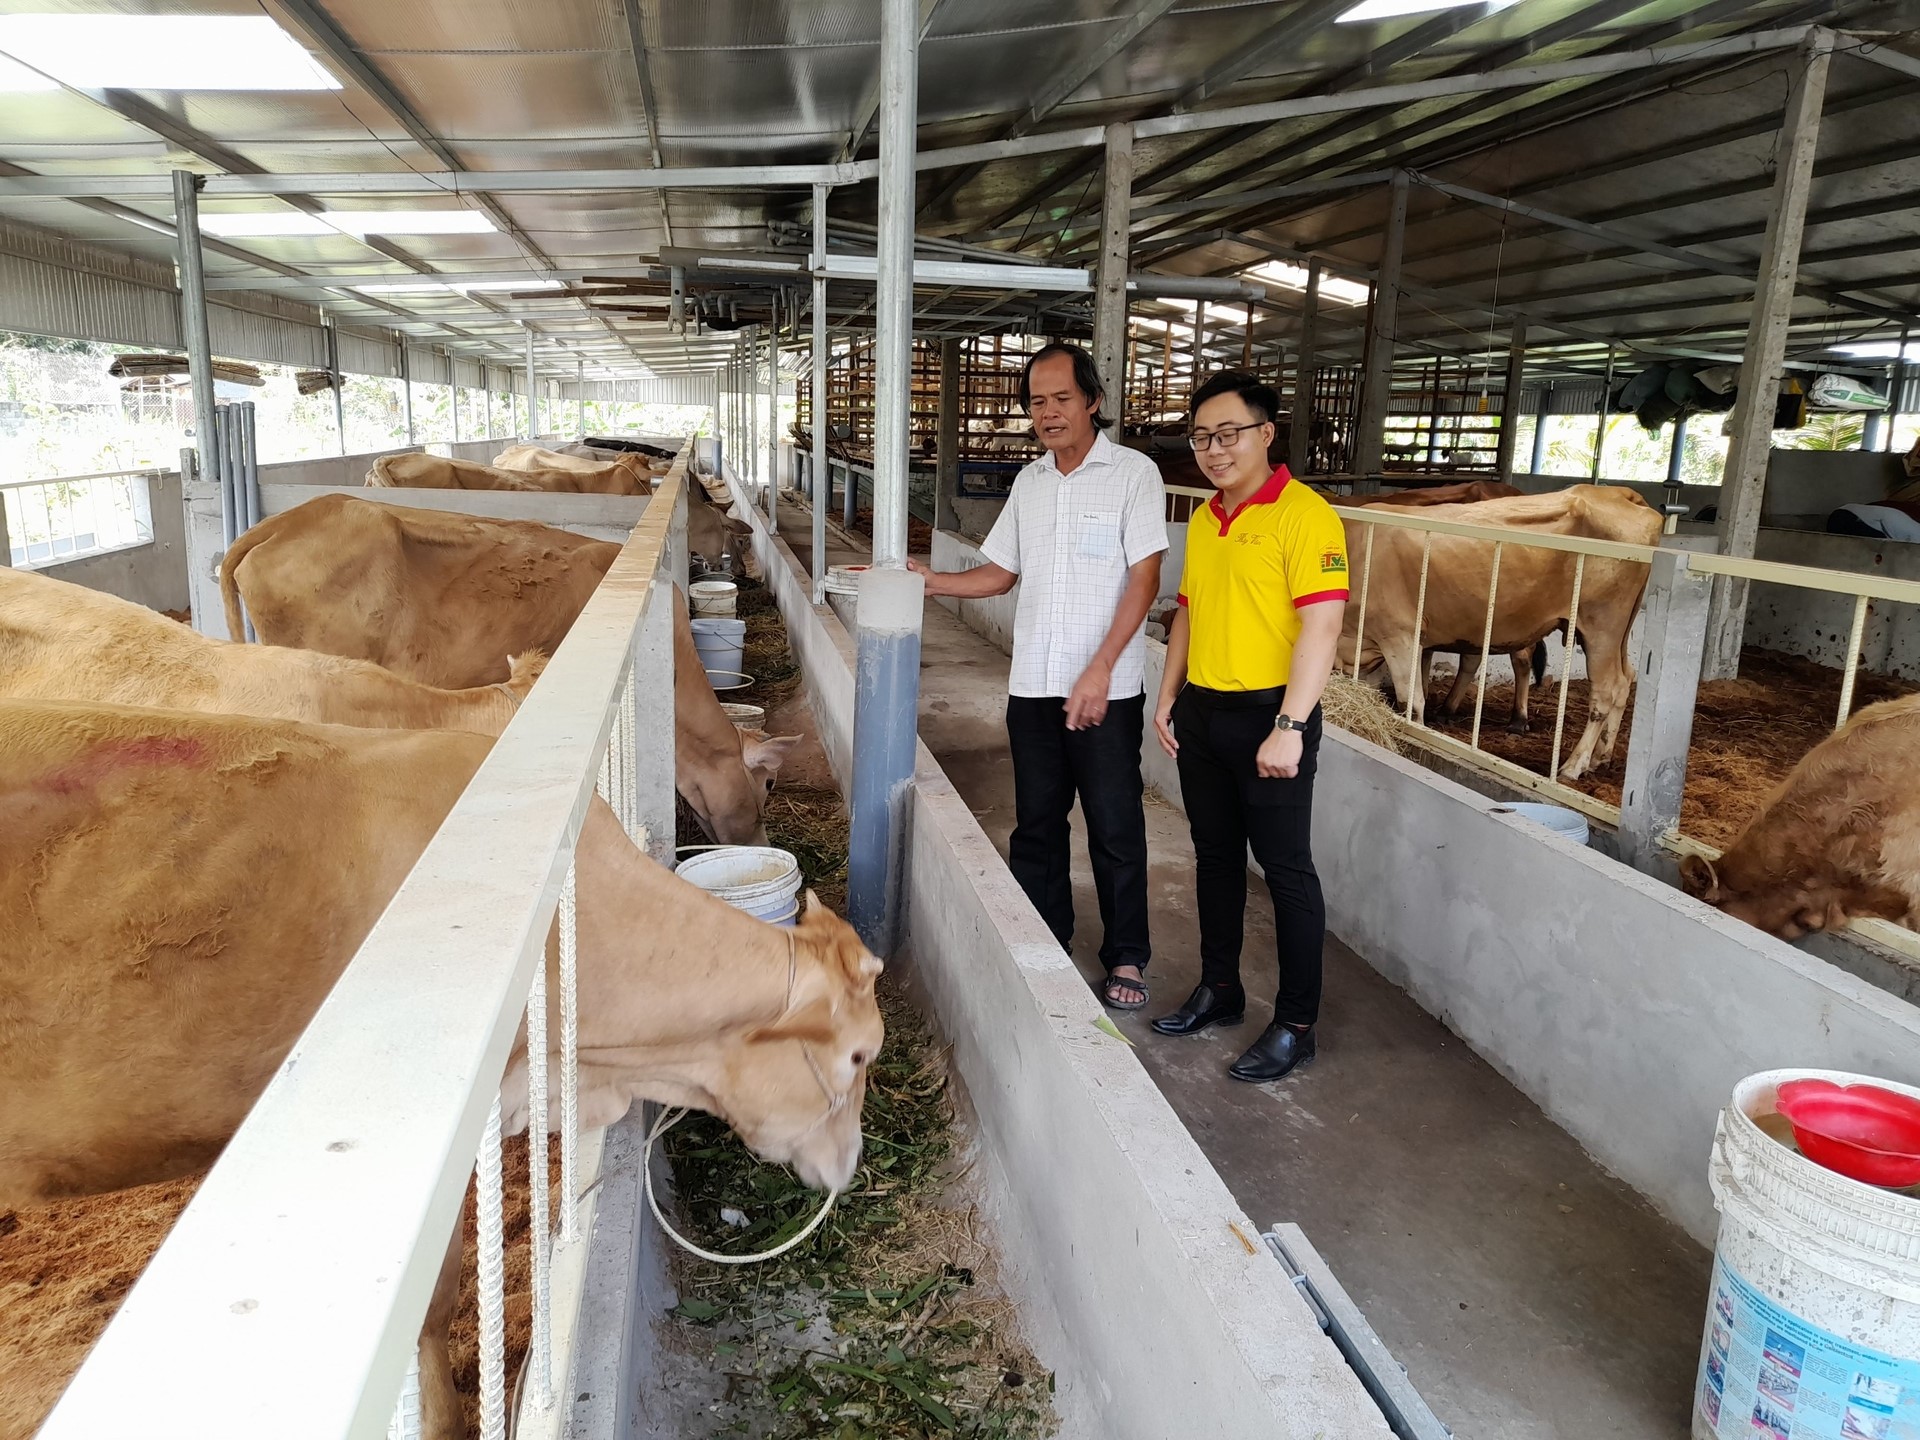 It is recommended for breeders to focus on biosafety to prevent and control diseases. Photo: Huu Duc.